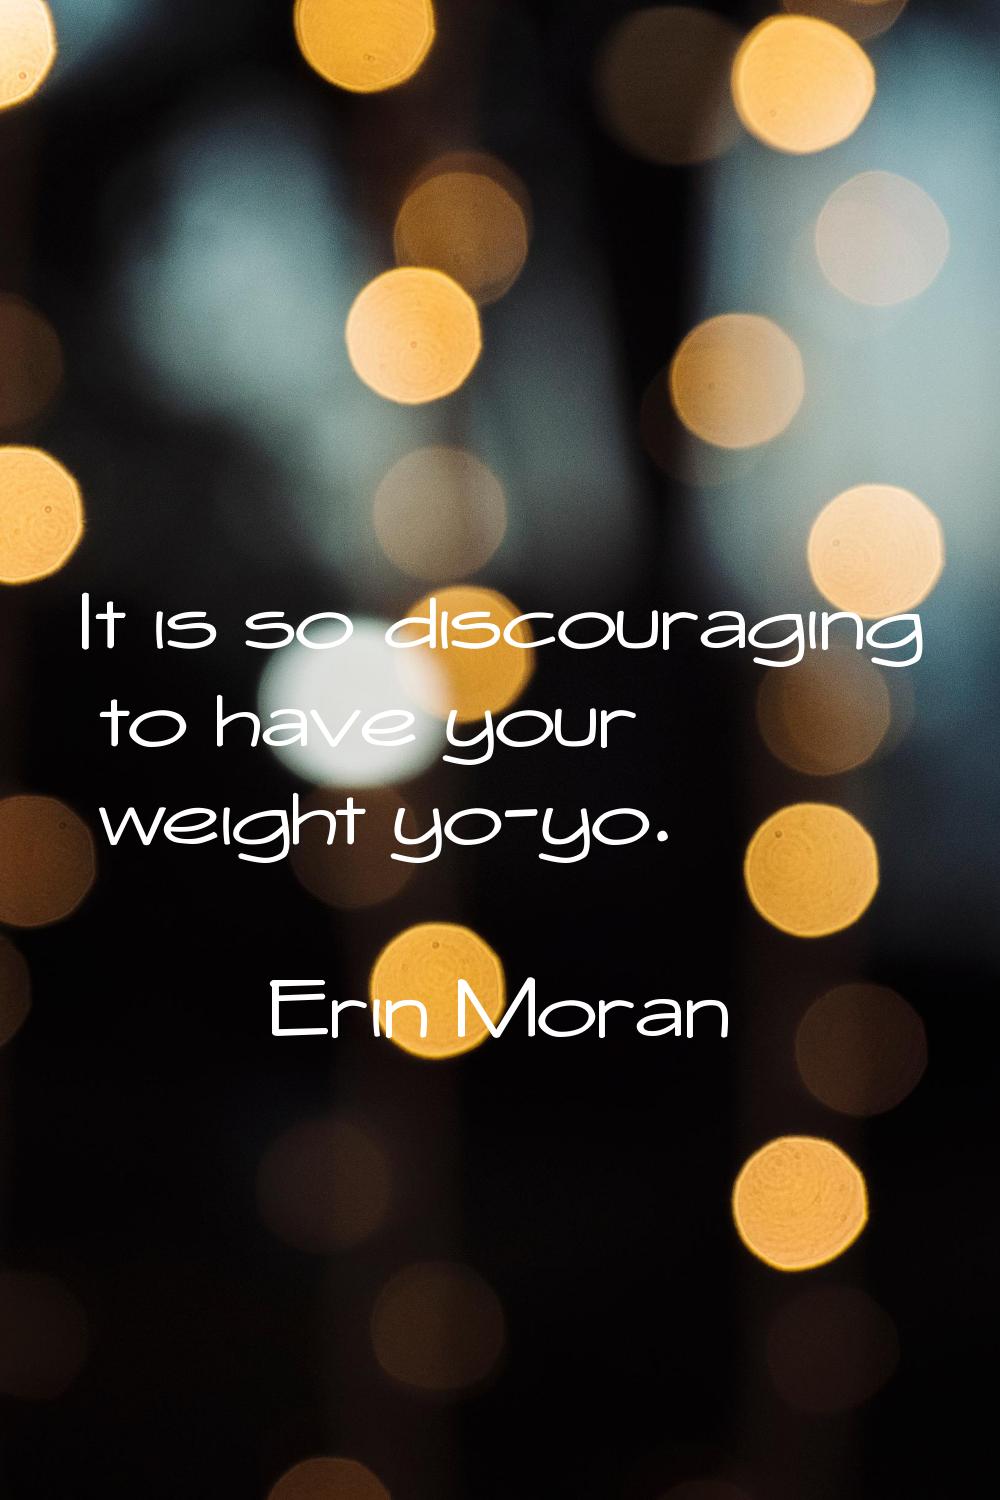 It is so discouraging to have your weight yo-yo.